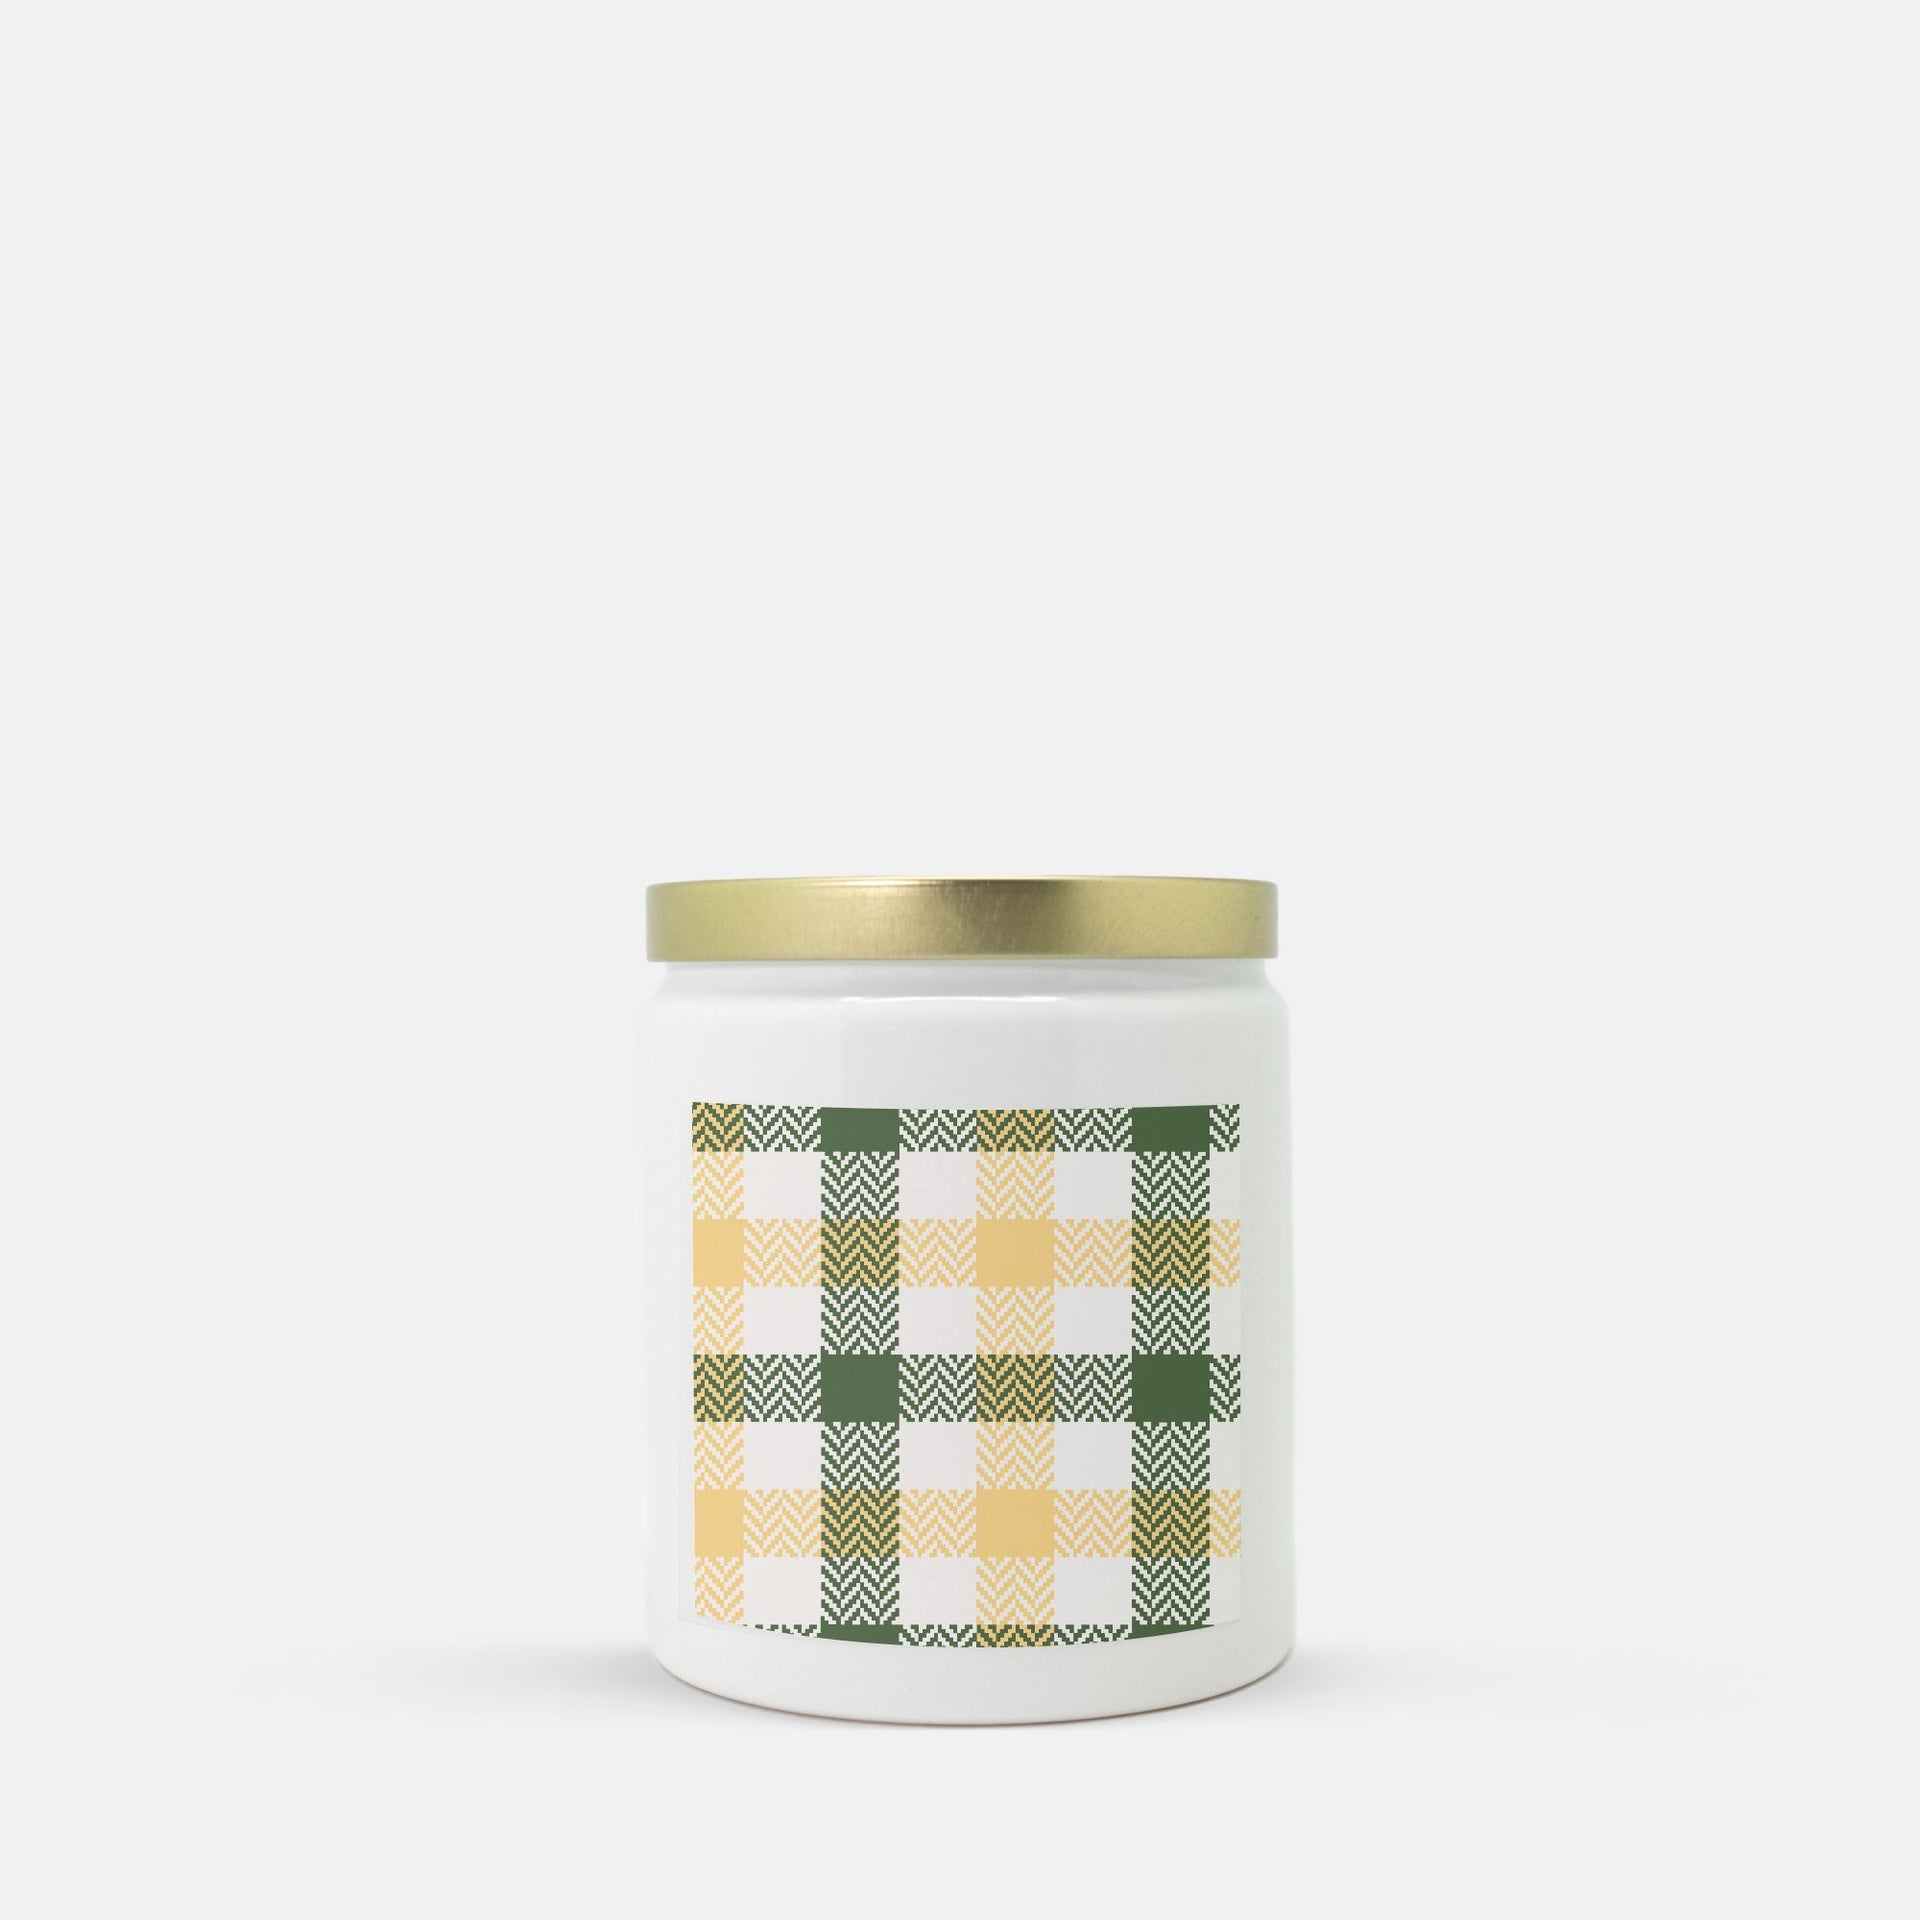 Lifestyle Details - Green & Yellow Plaid Ceramic Candle - Gold Lid - Vanilla Bean